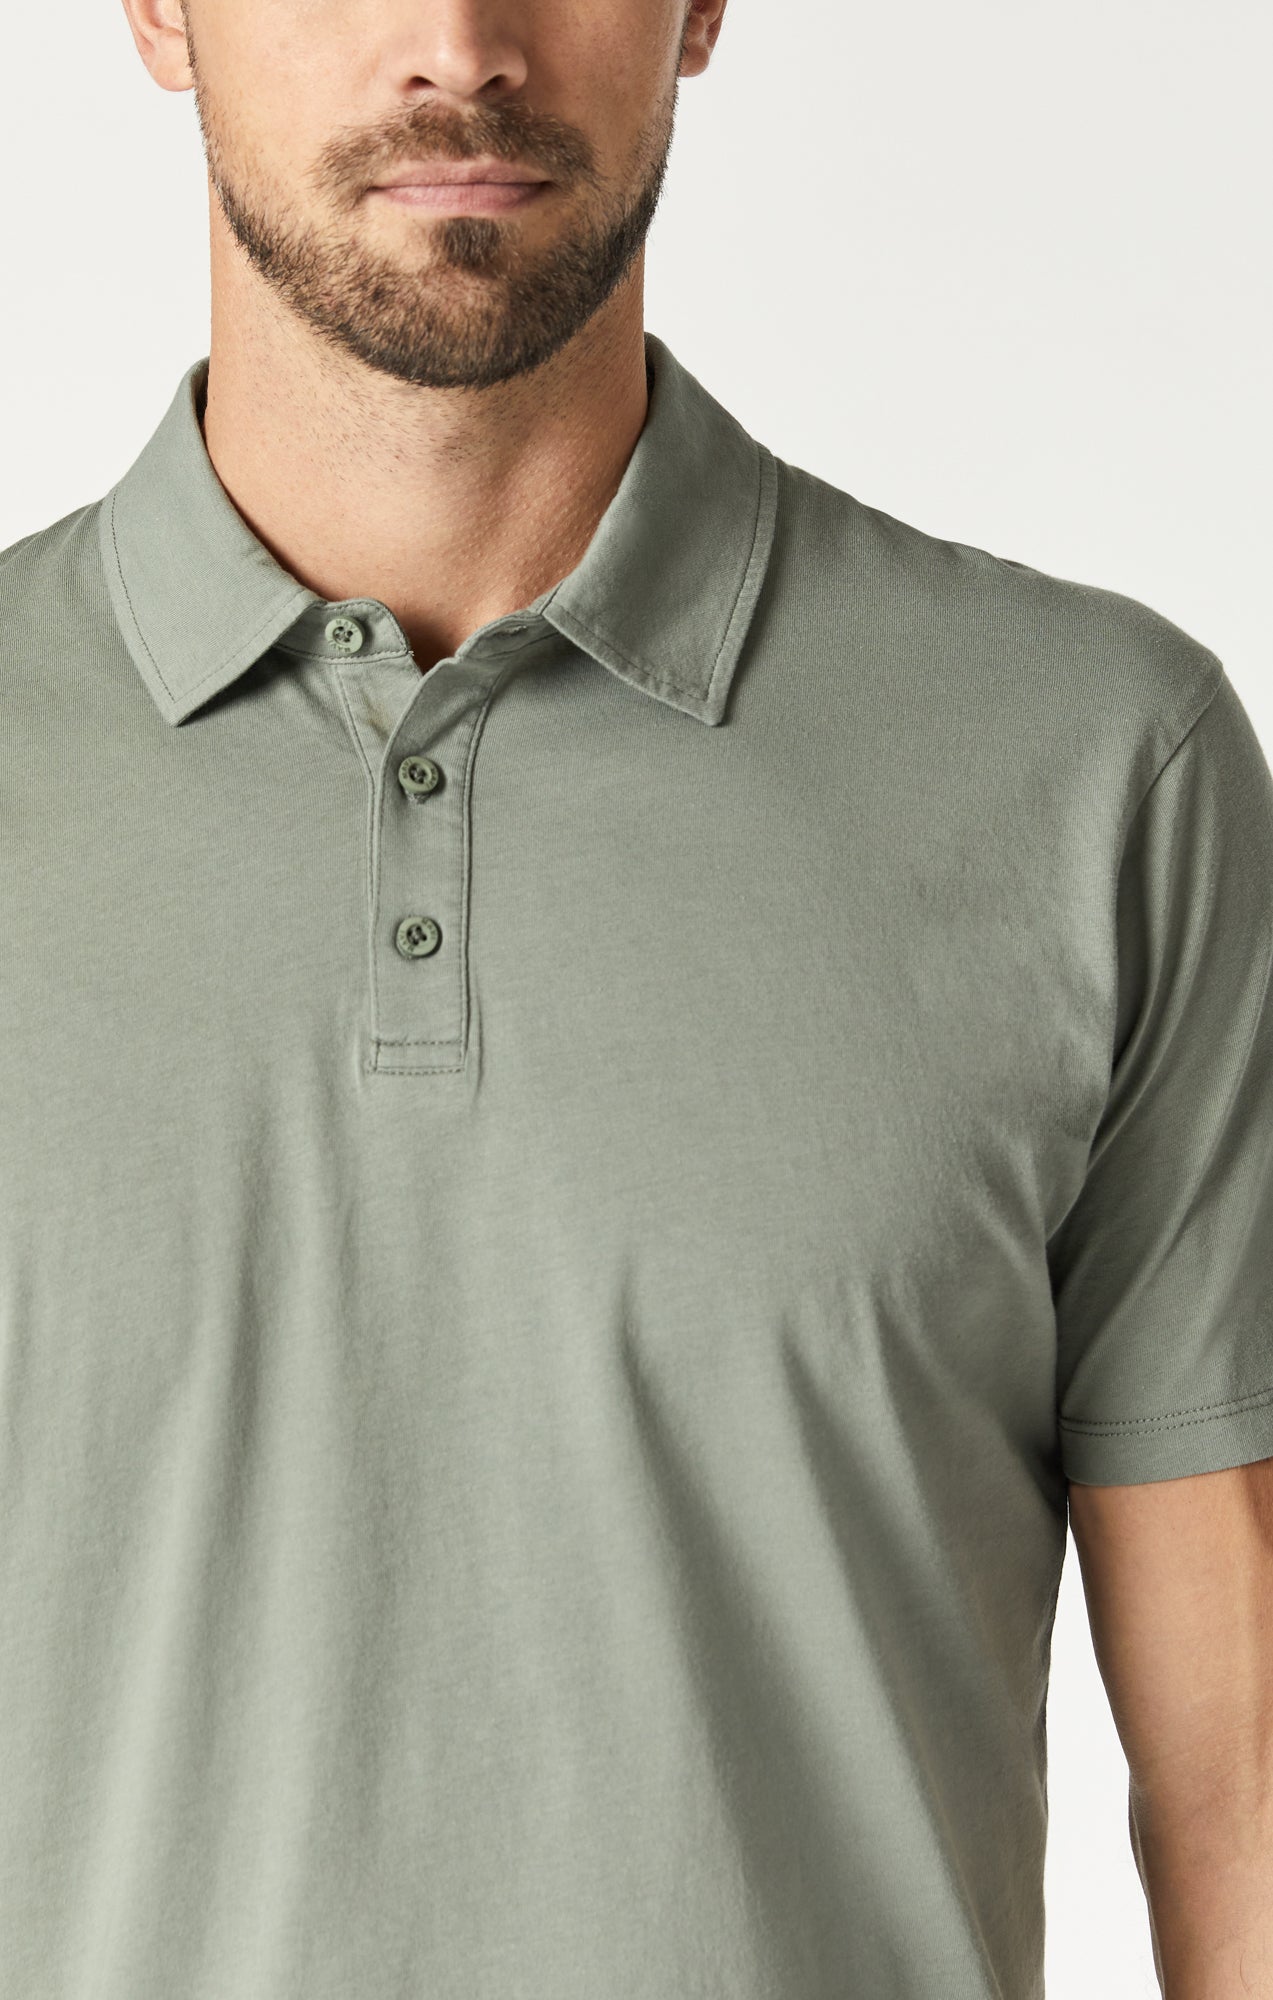 Finsbury Knitted Polo Shirt - Green Marl